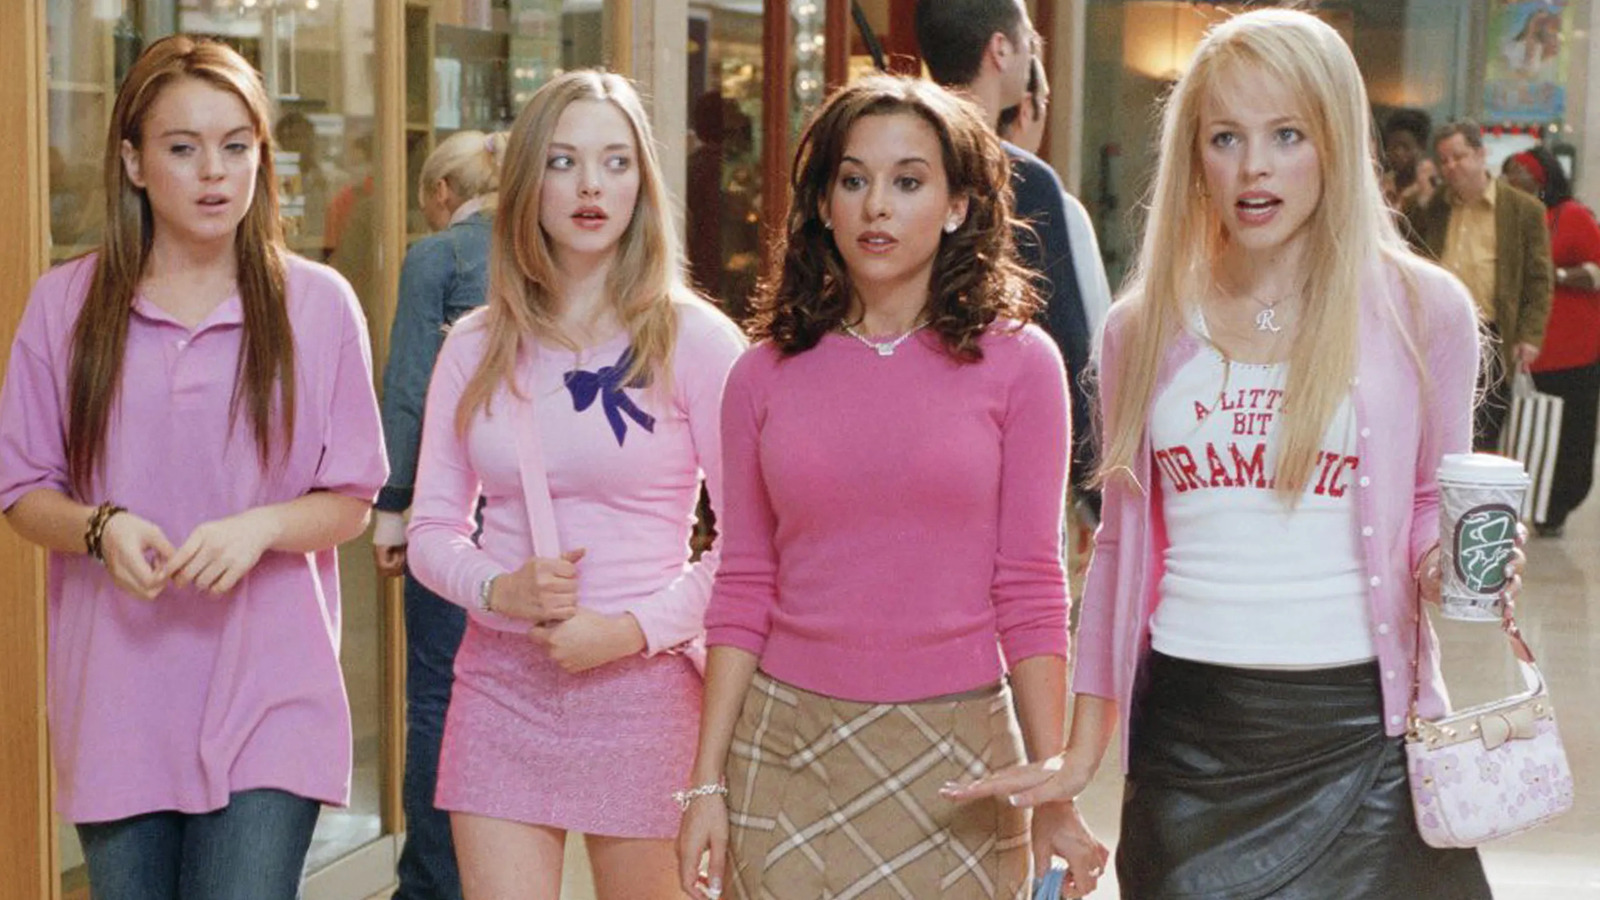 Mean Girls Musical Movie Release Date, Cast, Plot, And More Info